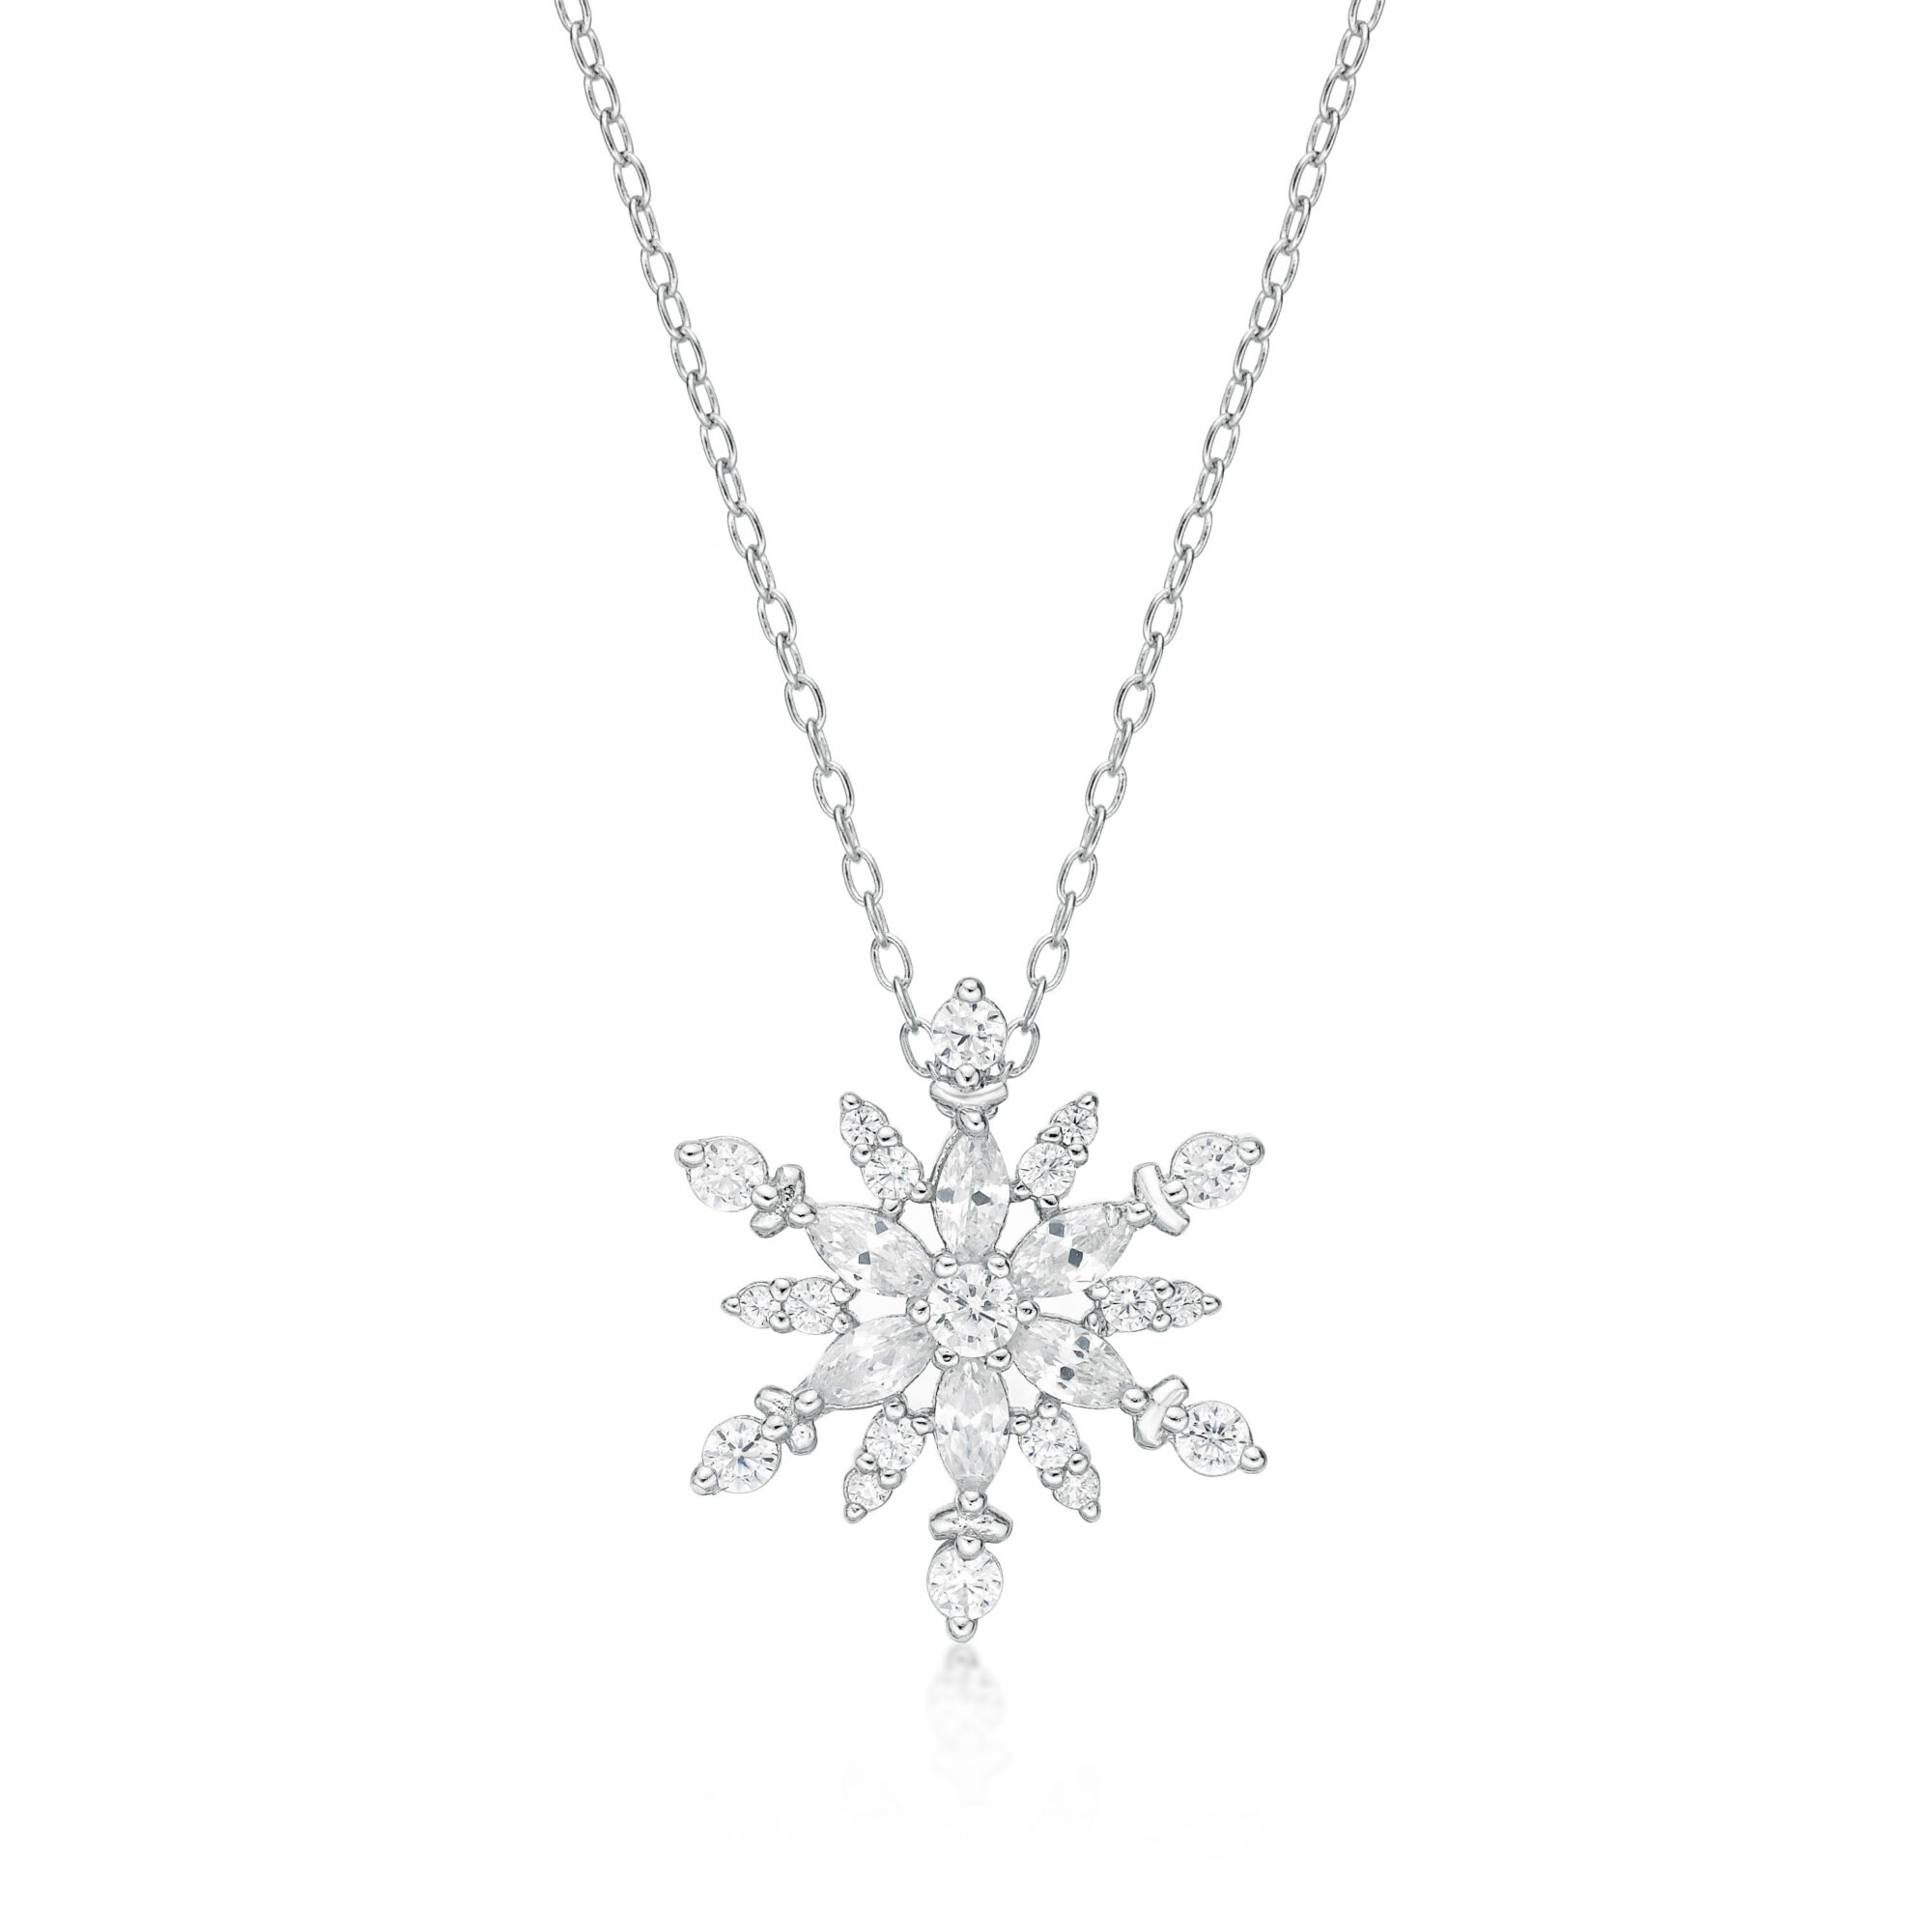 Lavari Jewelers Women’s Flurry Snowflake Pendant with Lobster Clasp, Sterling Silver, Cubic Zirconia, 18 Inch Adjustable Chain